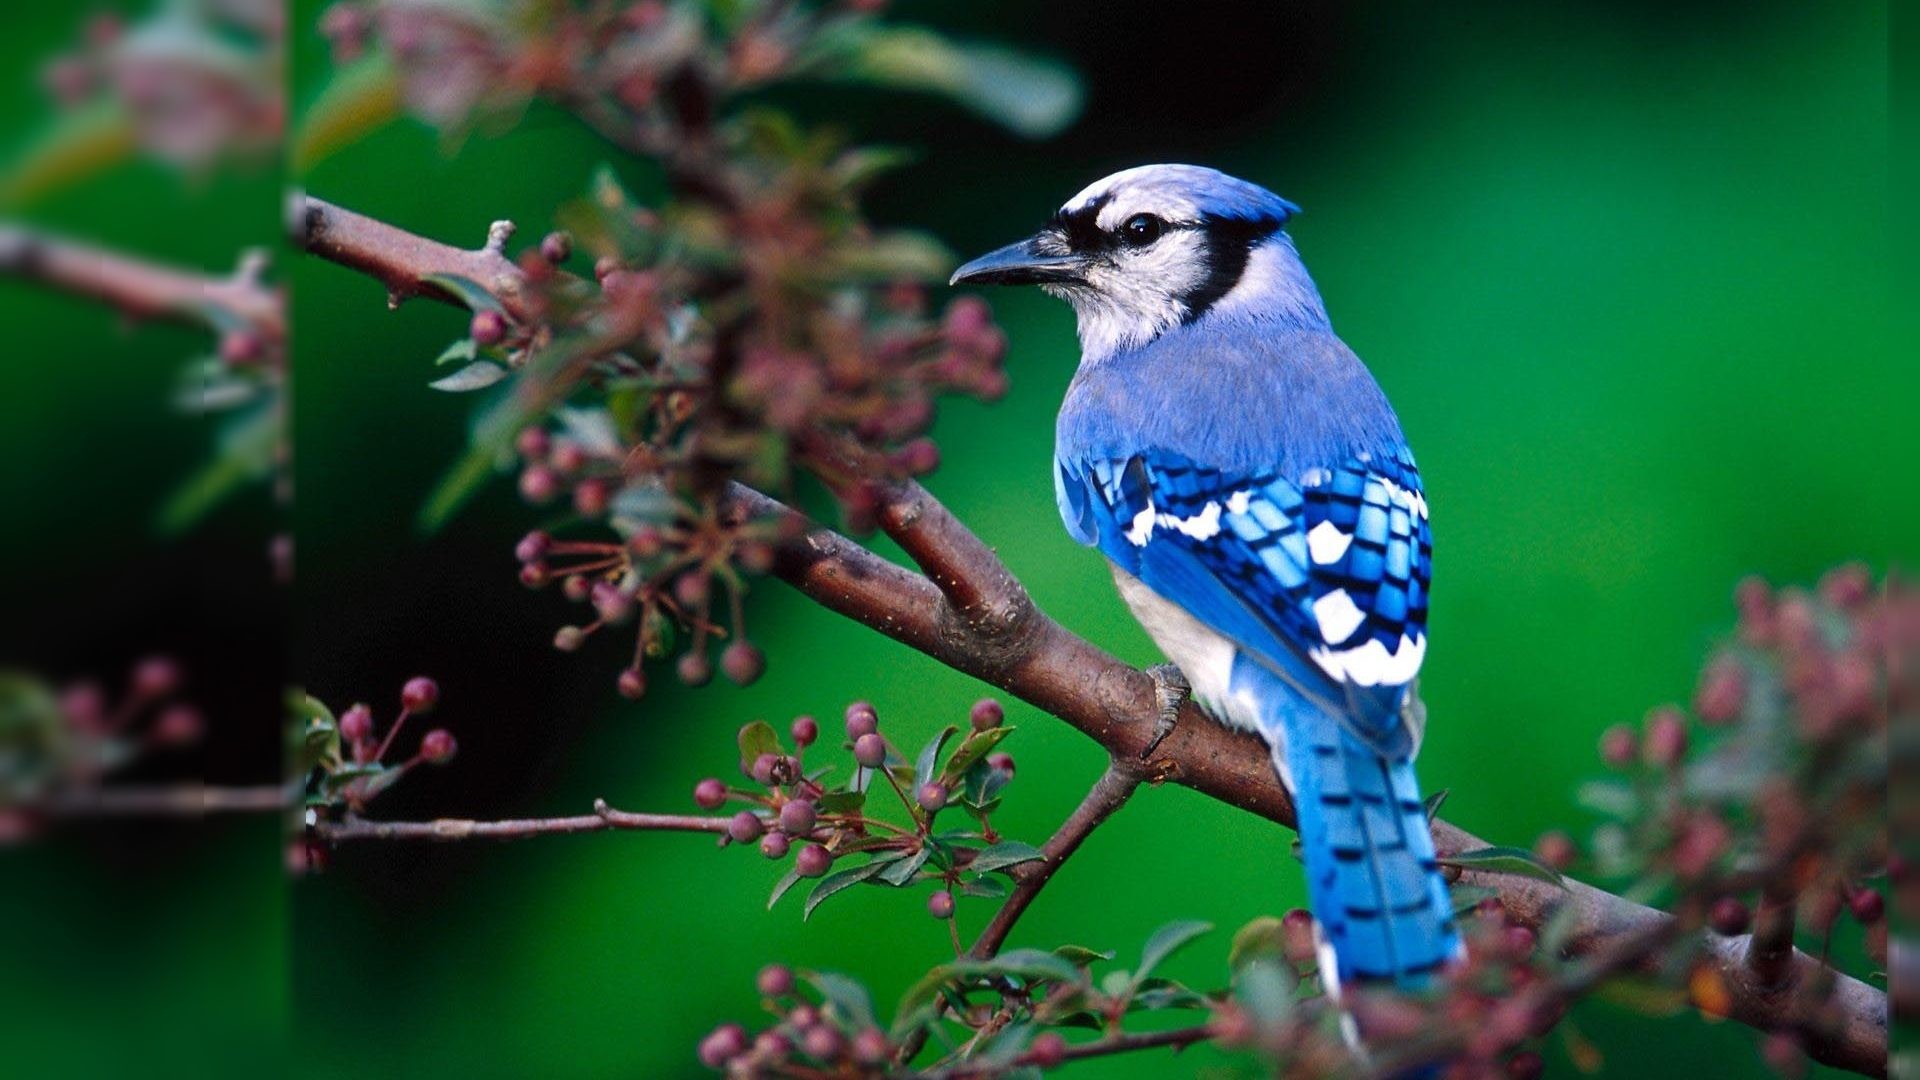 1920x1080 Free download images of beautiful birds wallpaper